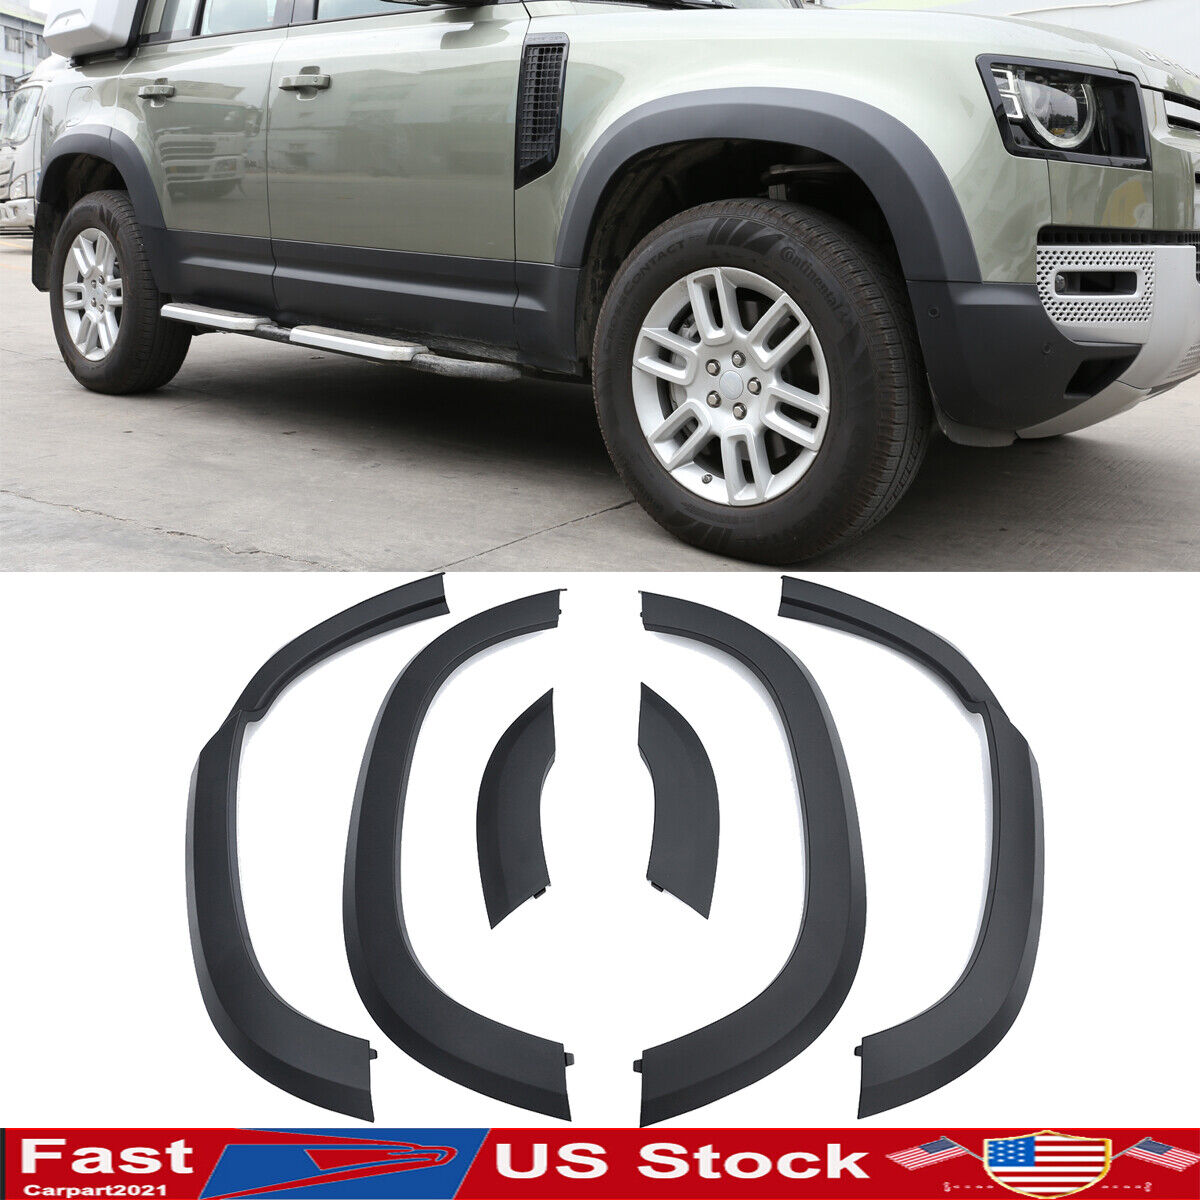 6PCS Glossy Black Car Wheel Arch Cover Trim For Land Rover Defender 110 2020-22